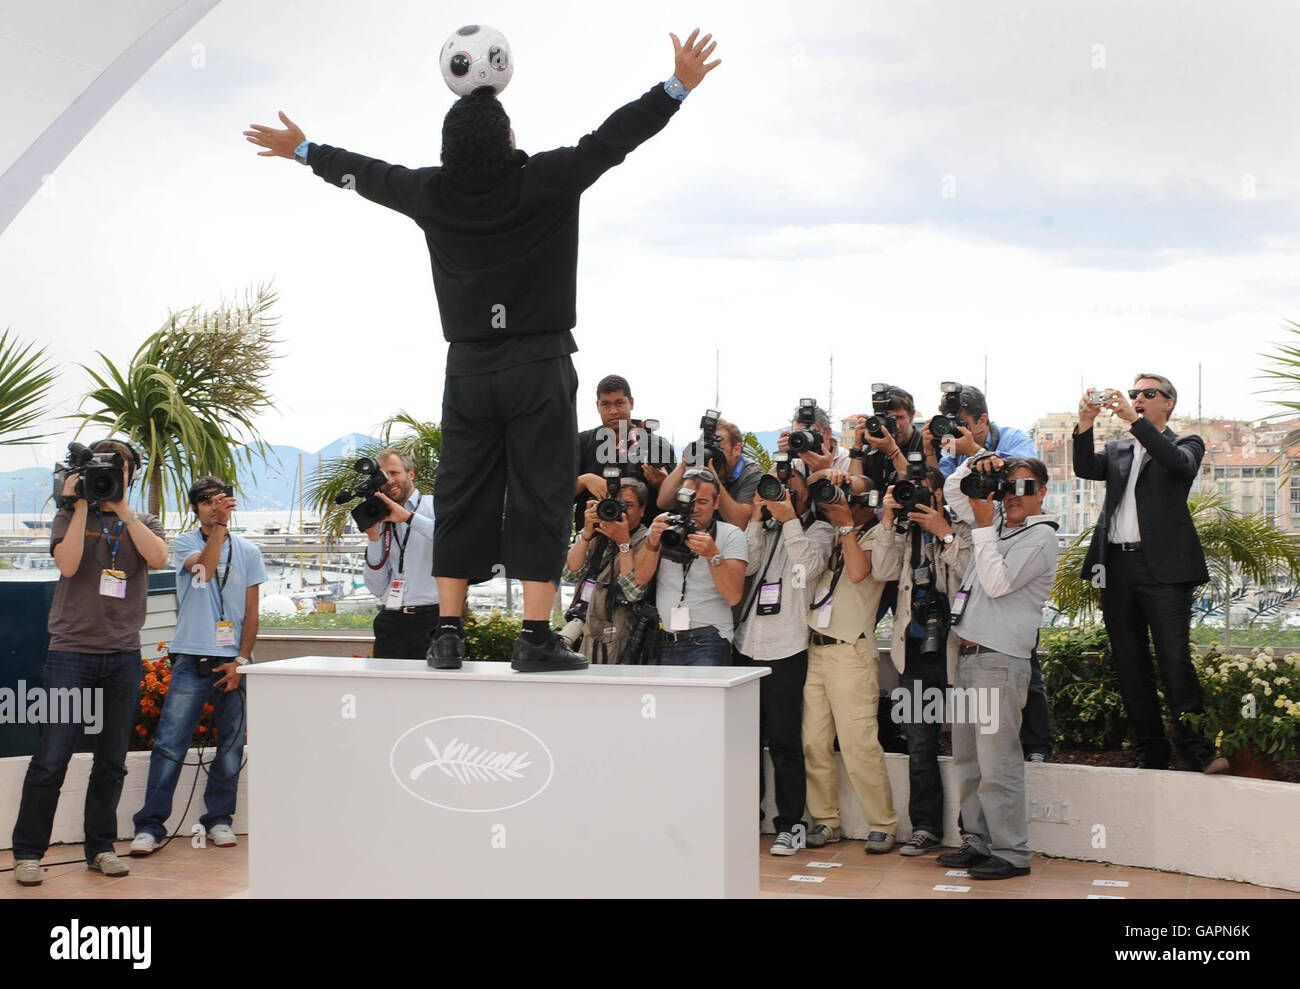 AP OUT. Maradona juggles a football in front of photographers as he attends a photocall for the film 'Maradona' by Emir Kusturica during the 61st Cannes Film Festival in France. Stock Photo